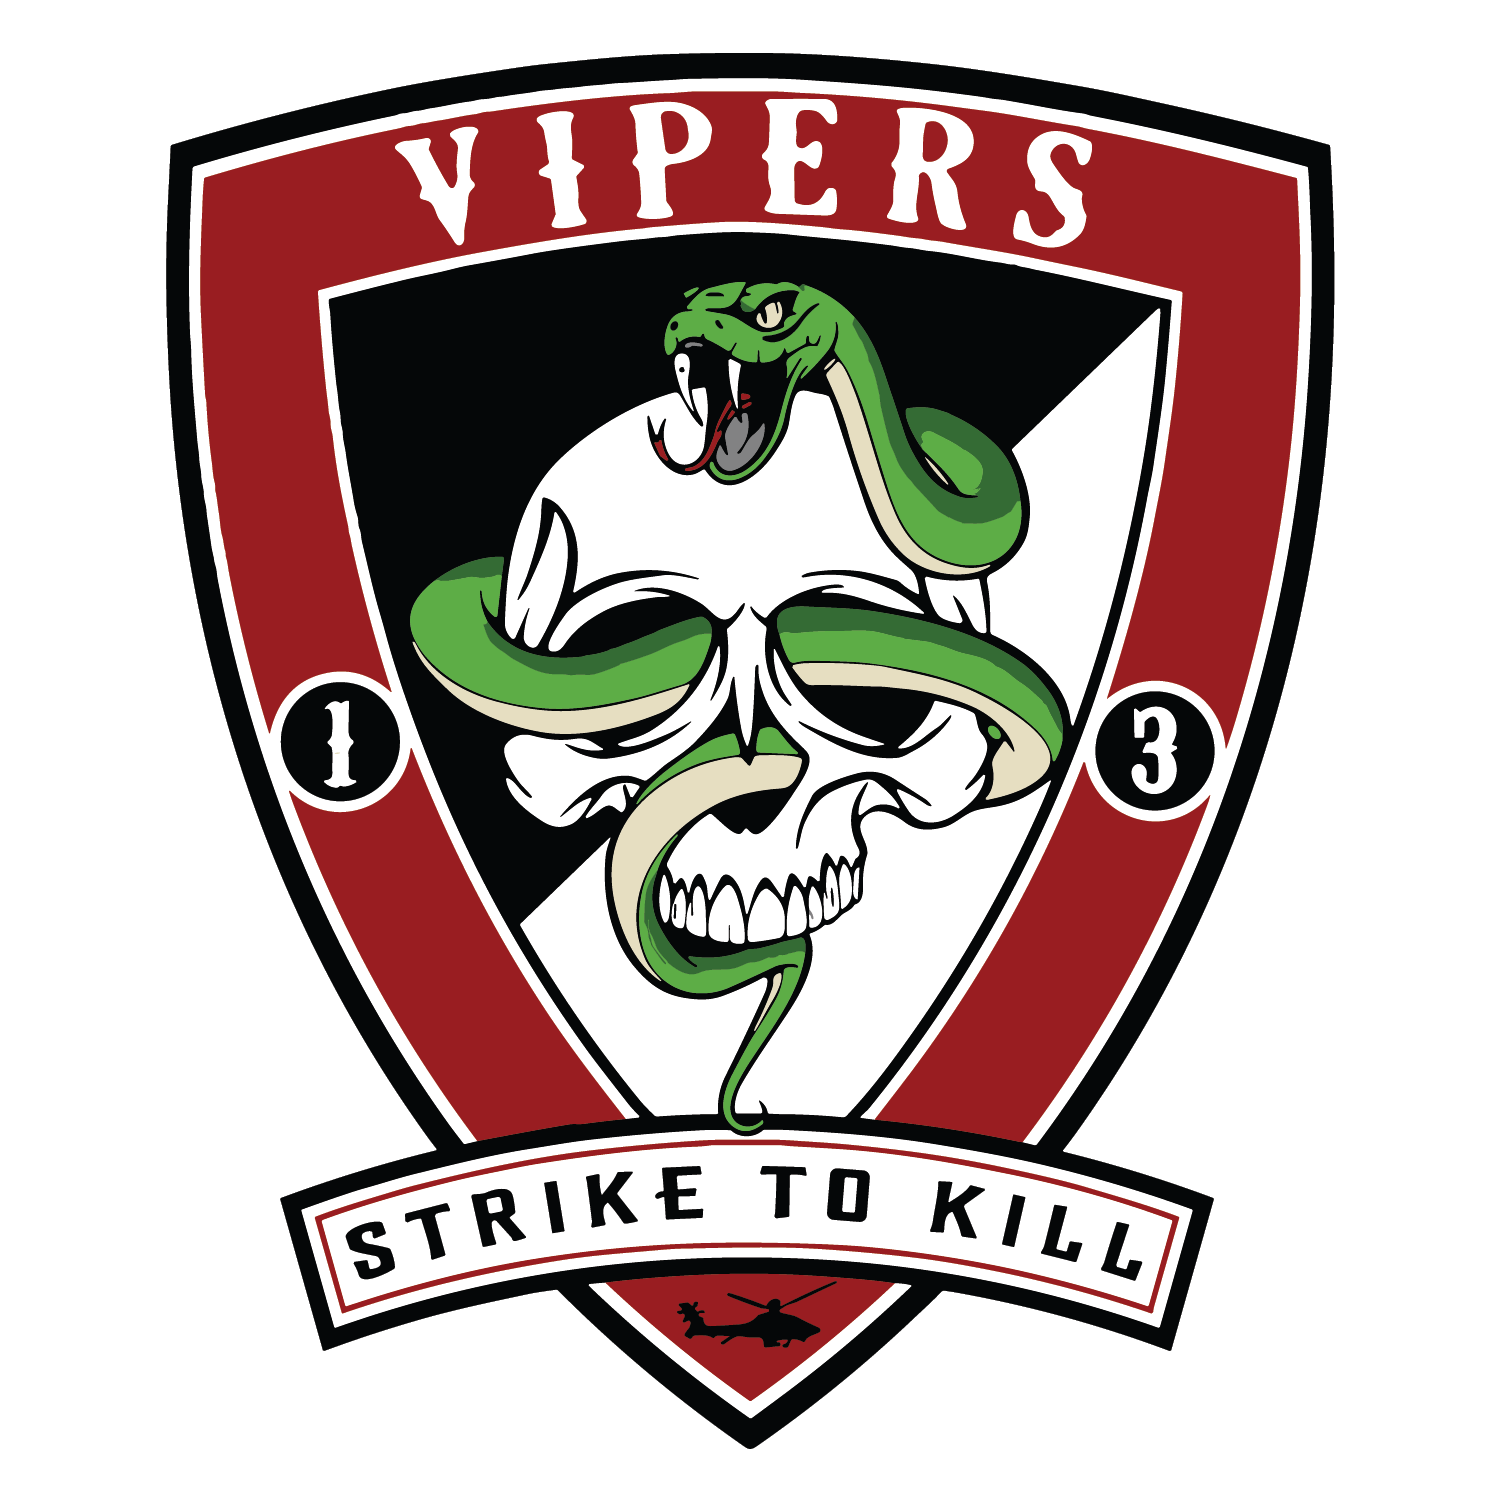 1-3 AB "VIPERS"